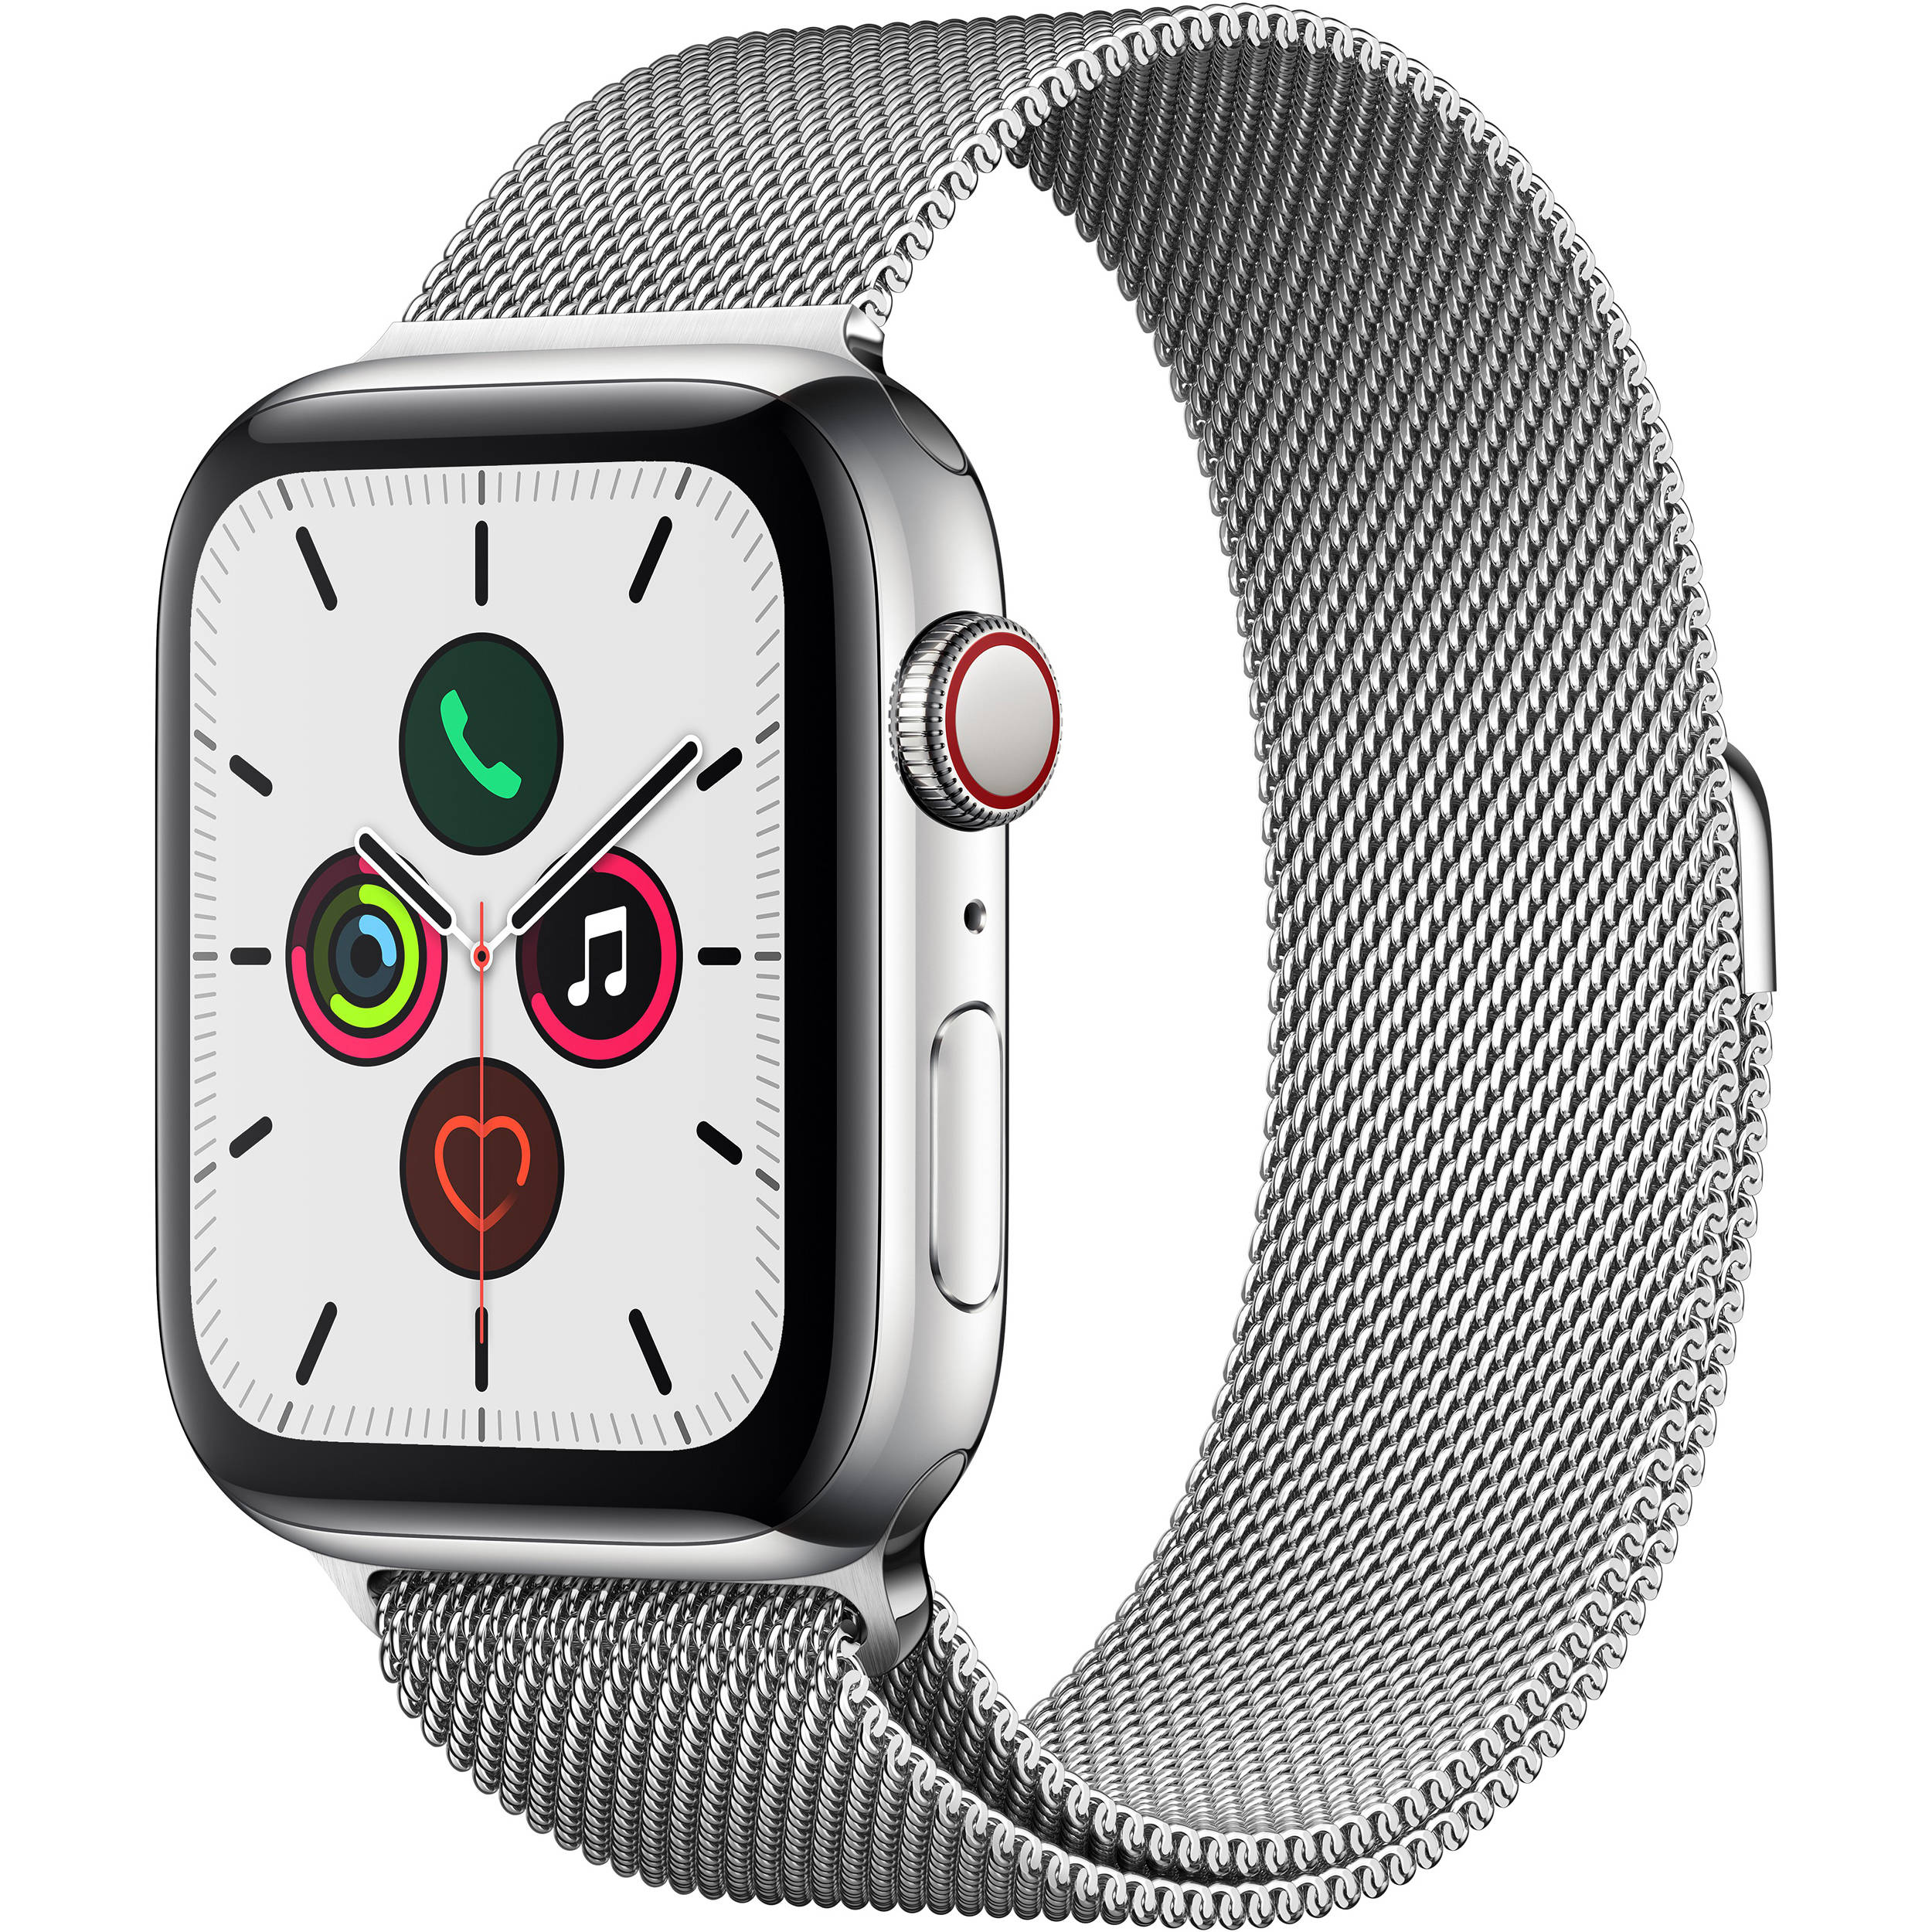 Apple Watch Series 5 Cellular Silver Stainless Steel 44mm Silver Apple Watch Stainless Steel Series 5 44mm